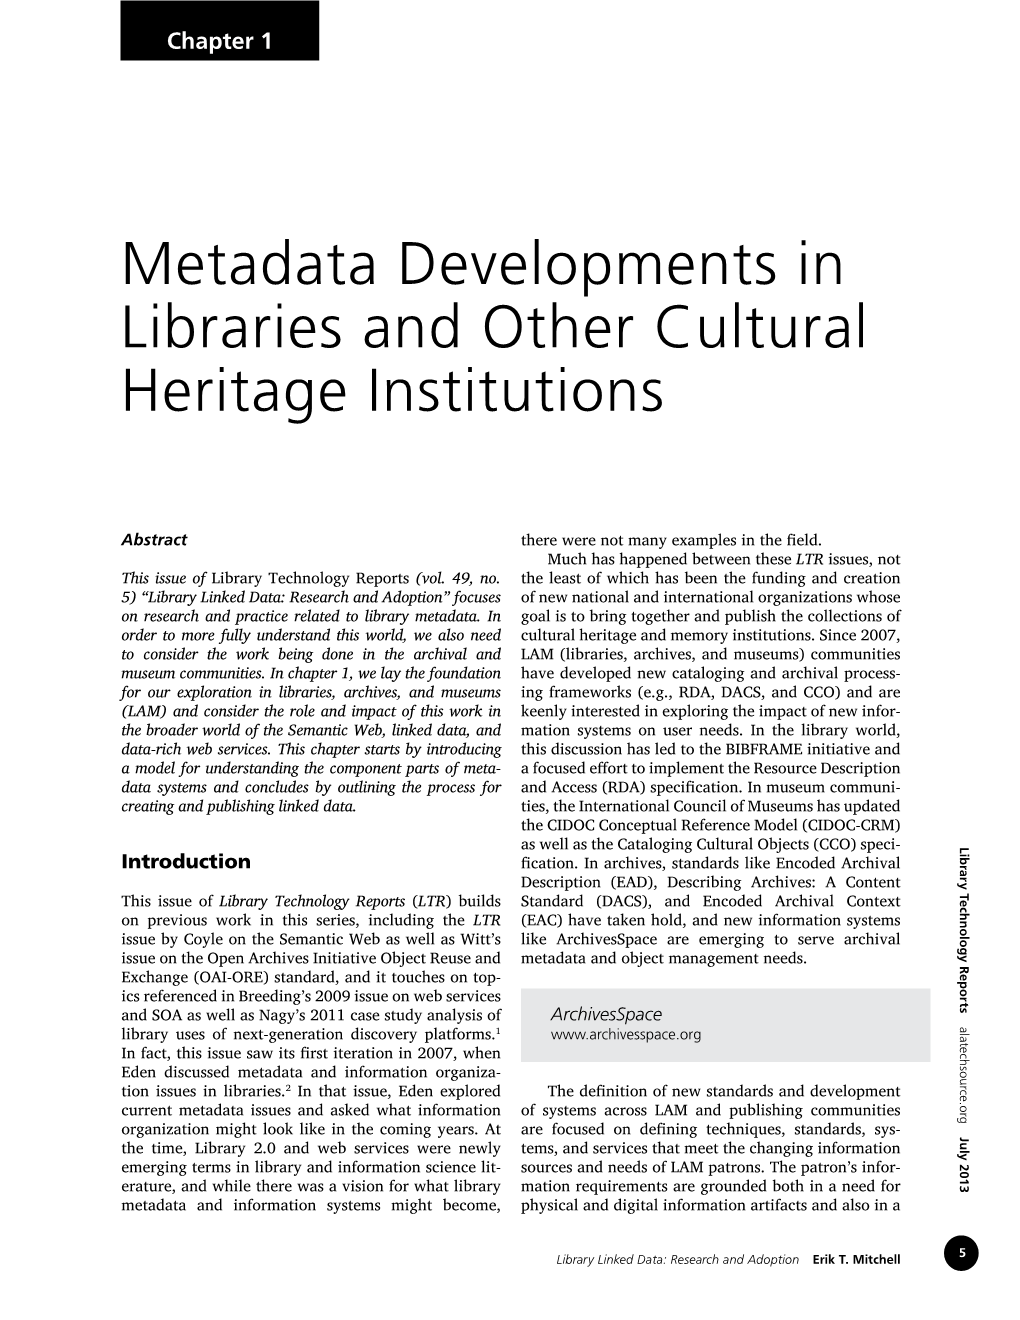 Metadata Developments in Libraries and Other Cultural Heritage Institutions